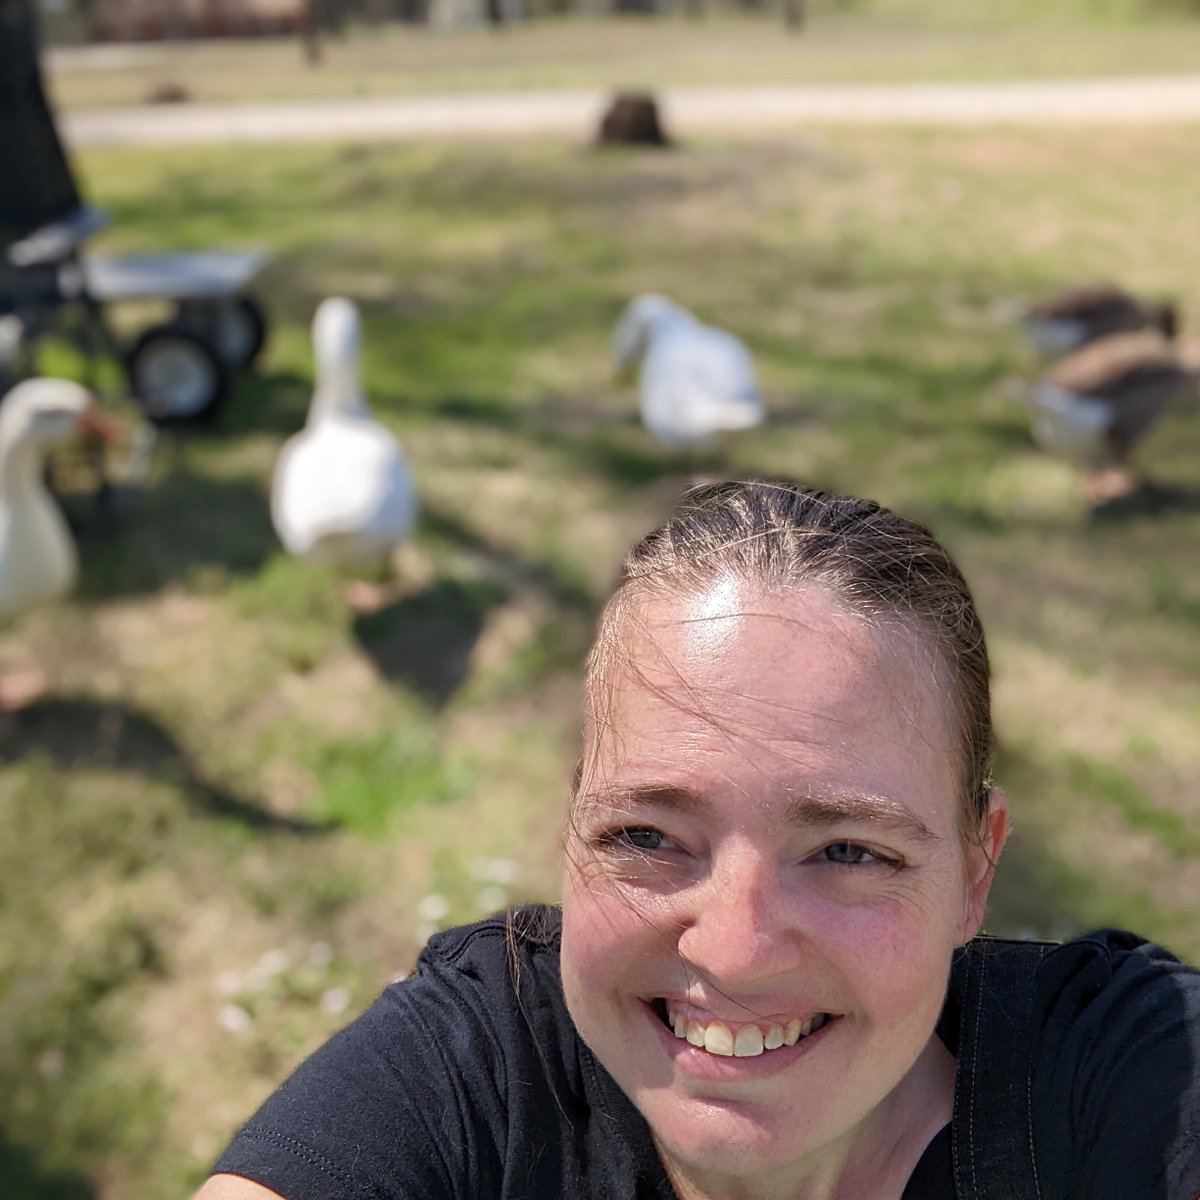 When they finally walk up for a selfie and you forget portrait mode blurs... #oops #pilgrimGeese #geeseOfInstagram #selfieFail #TiedtHonkers